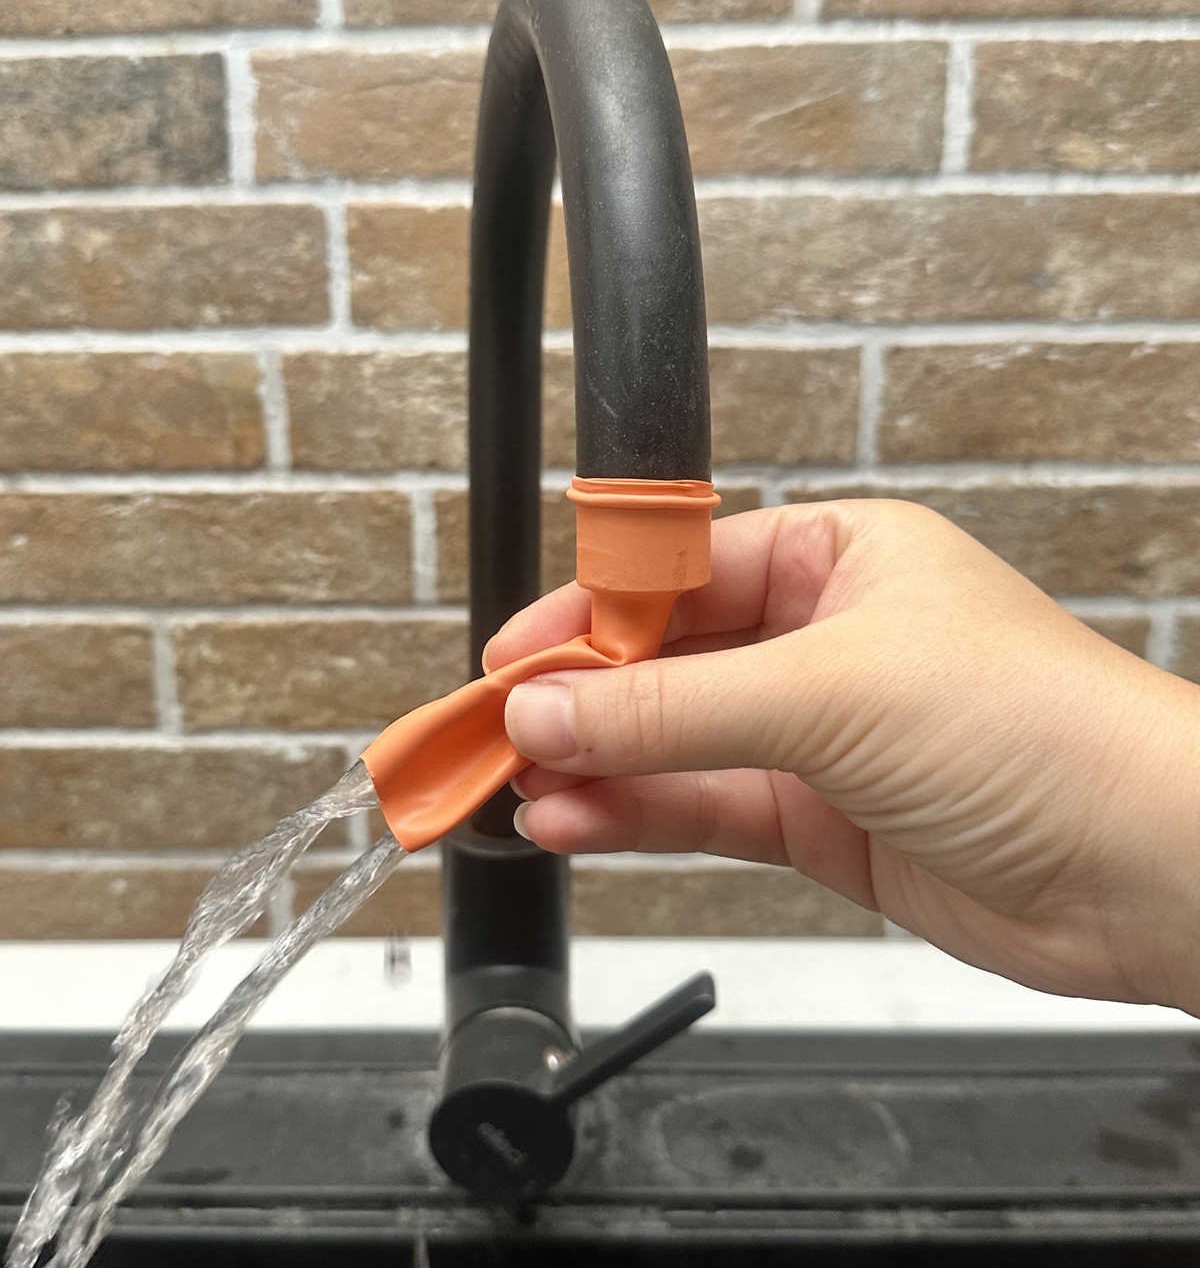 Use a Balloon to Easily Rinse the Sink.